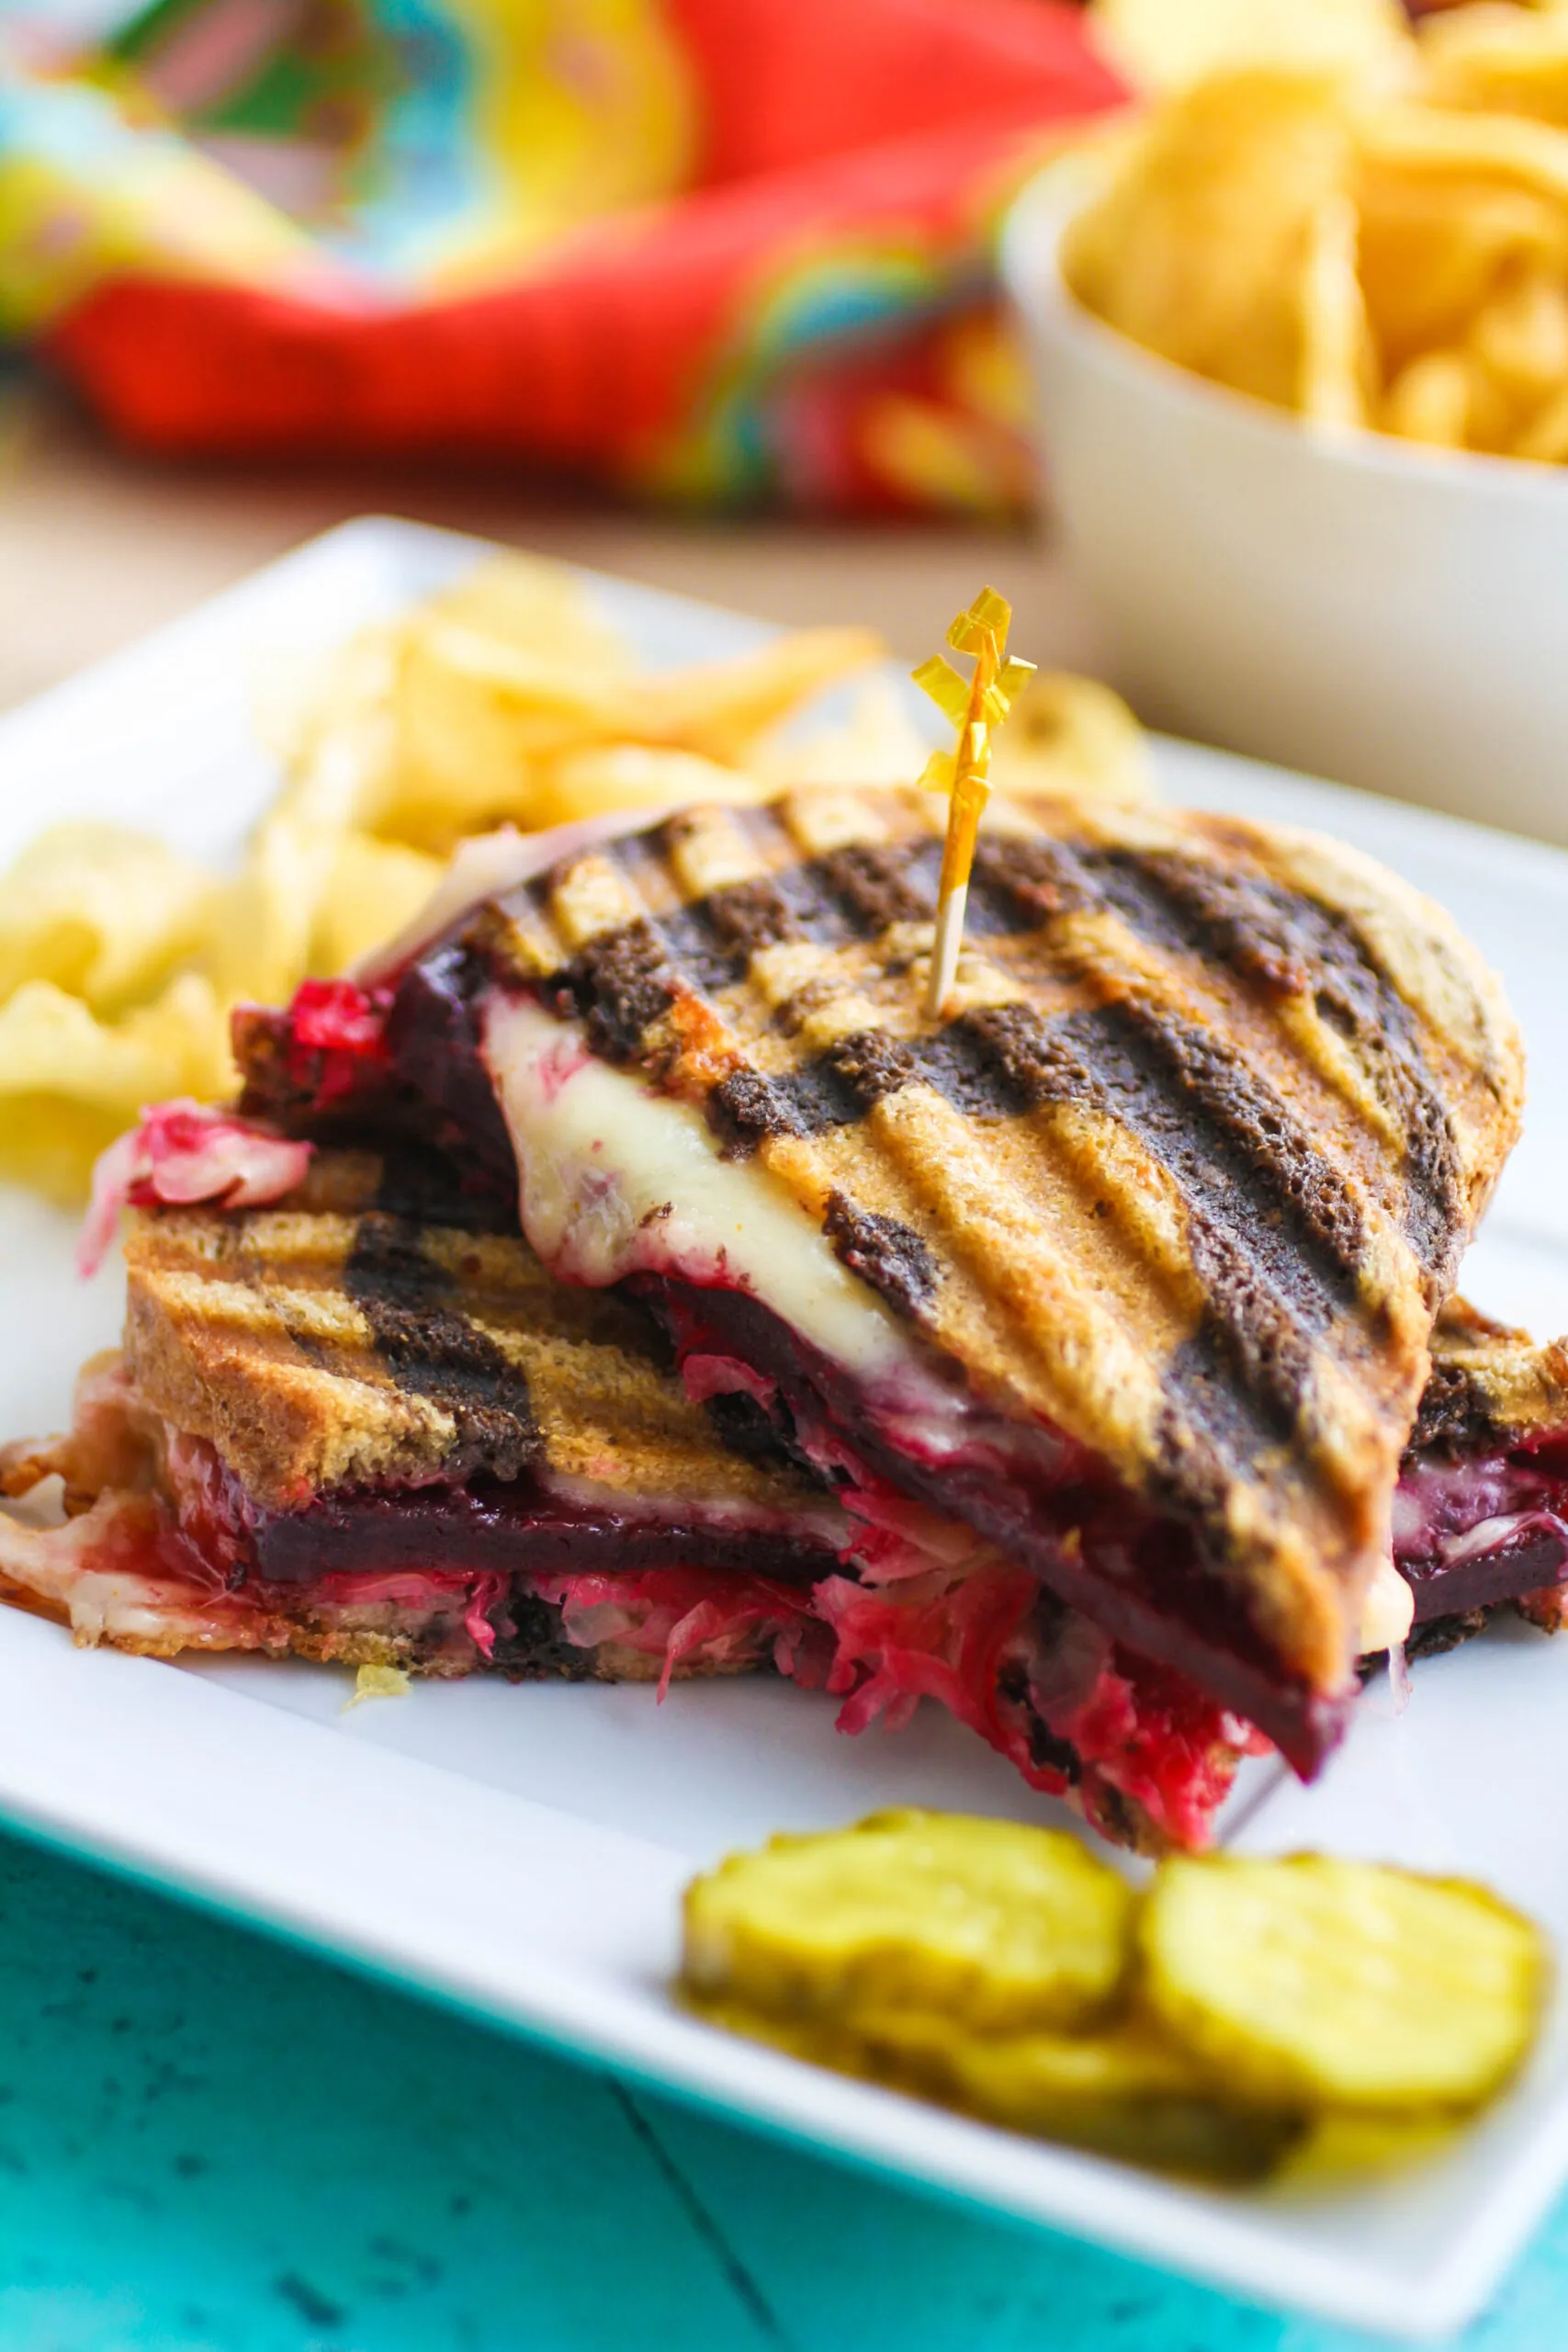 This Vegetarian Beet Reuben Panini Sandwich is sliced and ready to enjoy! What a tasty sandwich!